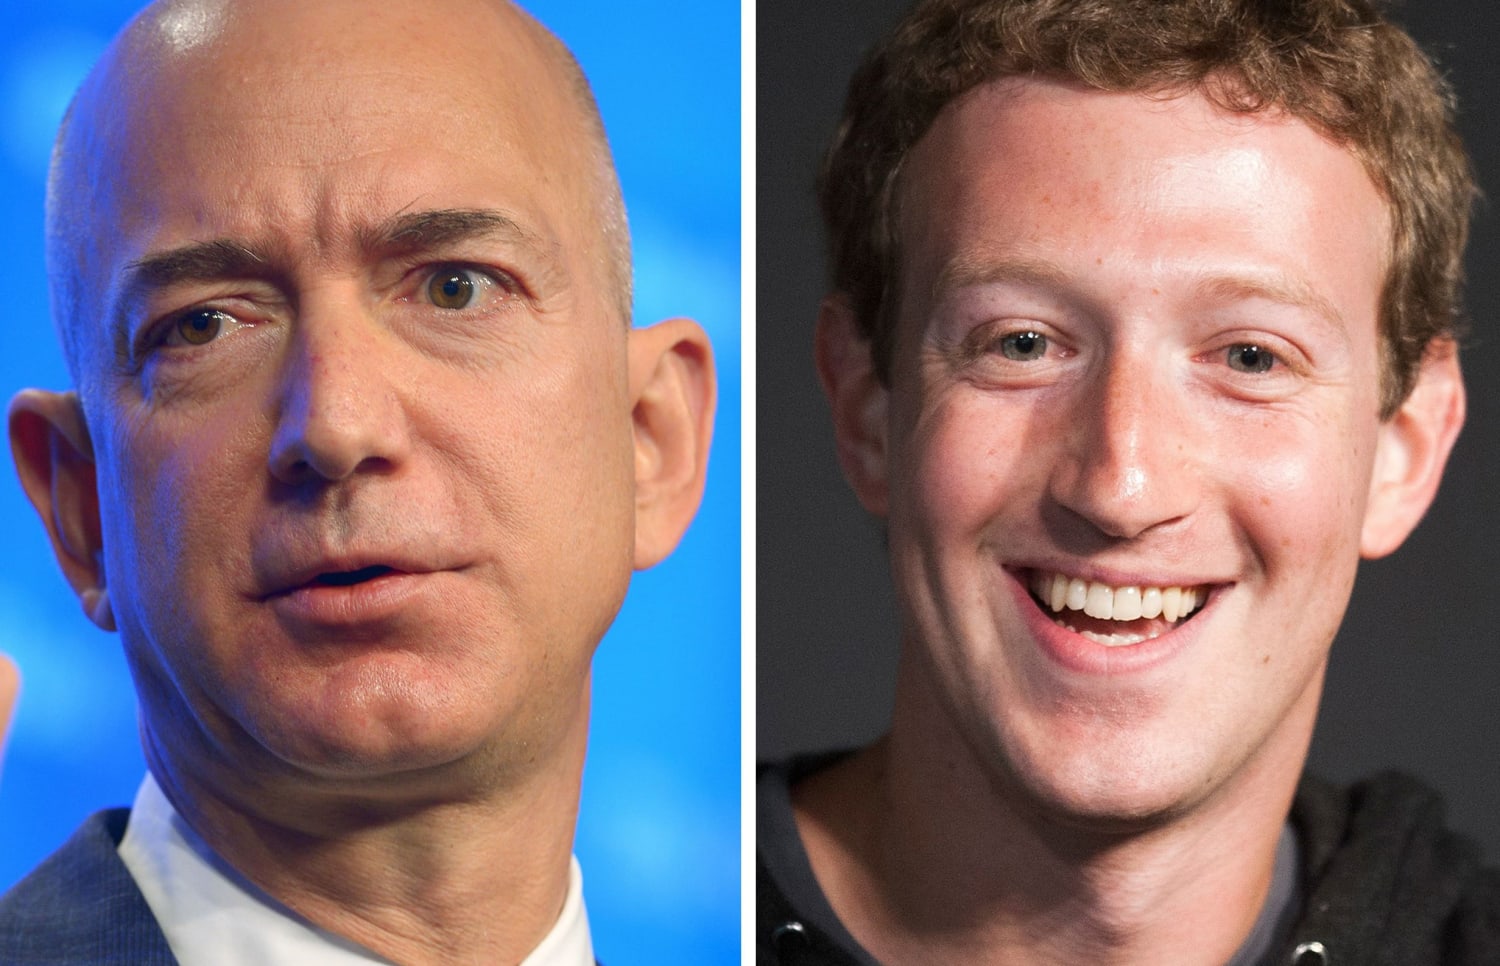 5 powerful traits that separate successful millionaires like Jeff Bezos and Mark Zuckerberg from everyone else